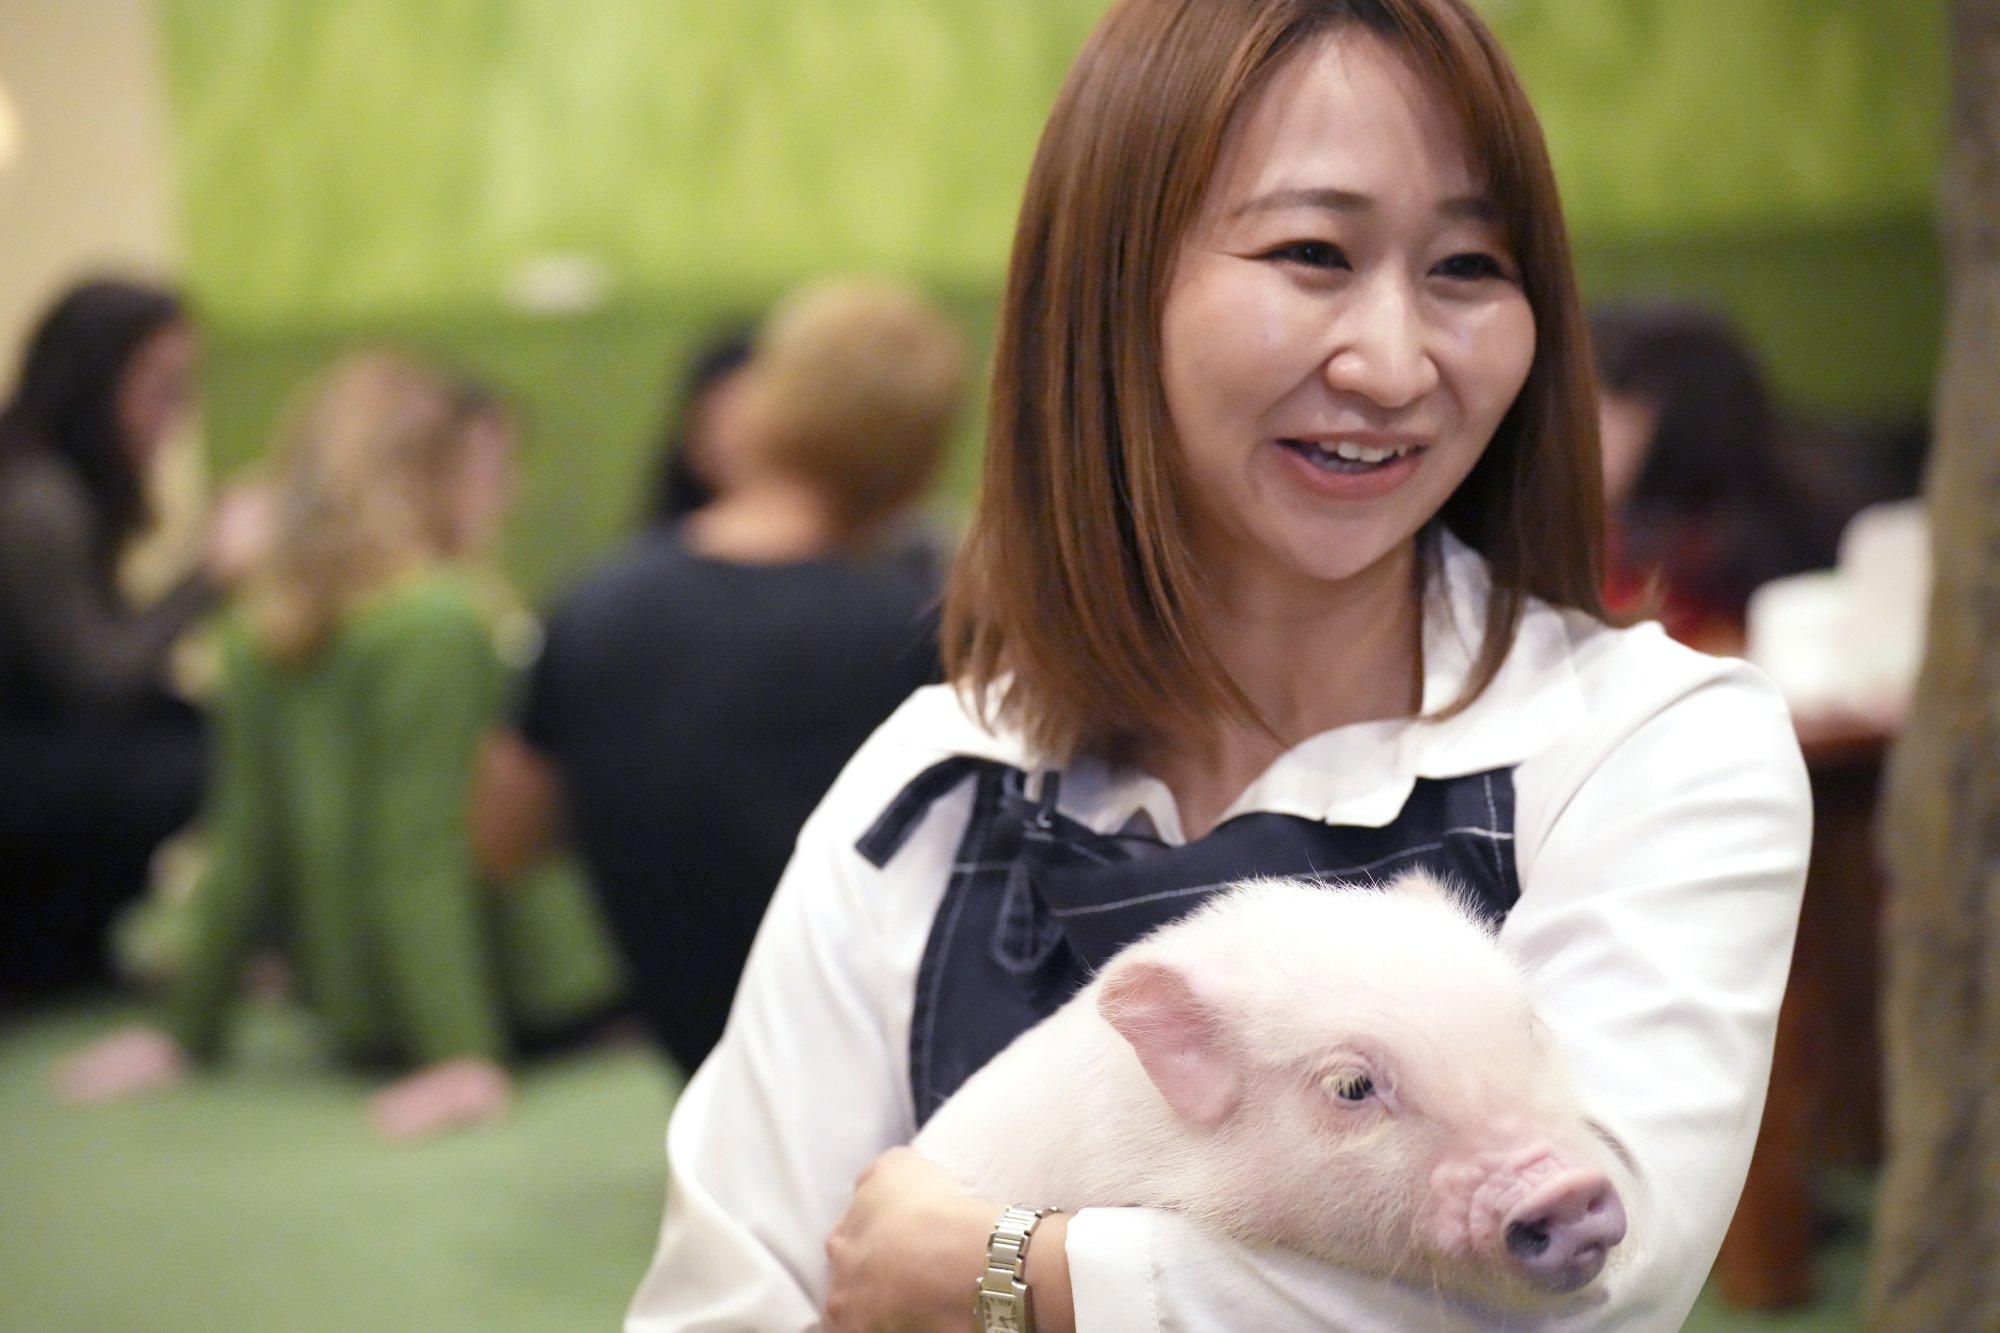 Forget cat cafes, Japan now has coffee shops where you can cuddle a pig |  South China Morning Post